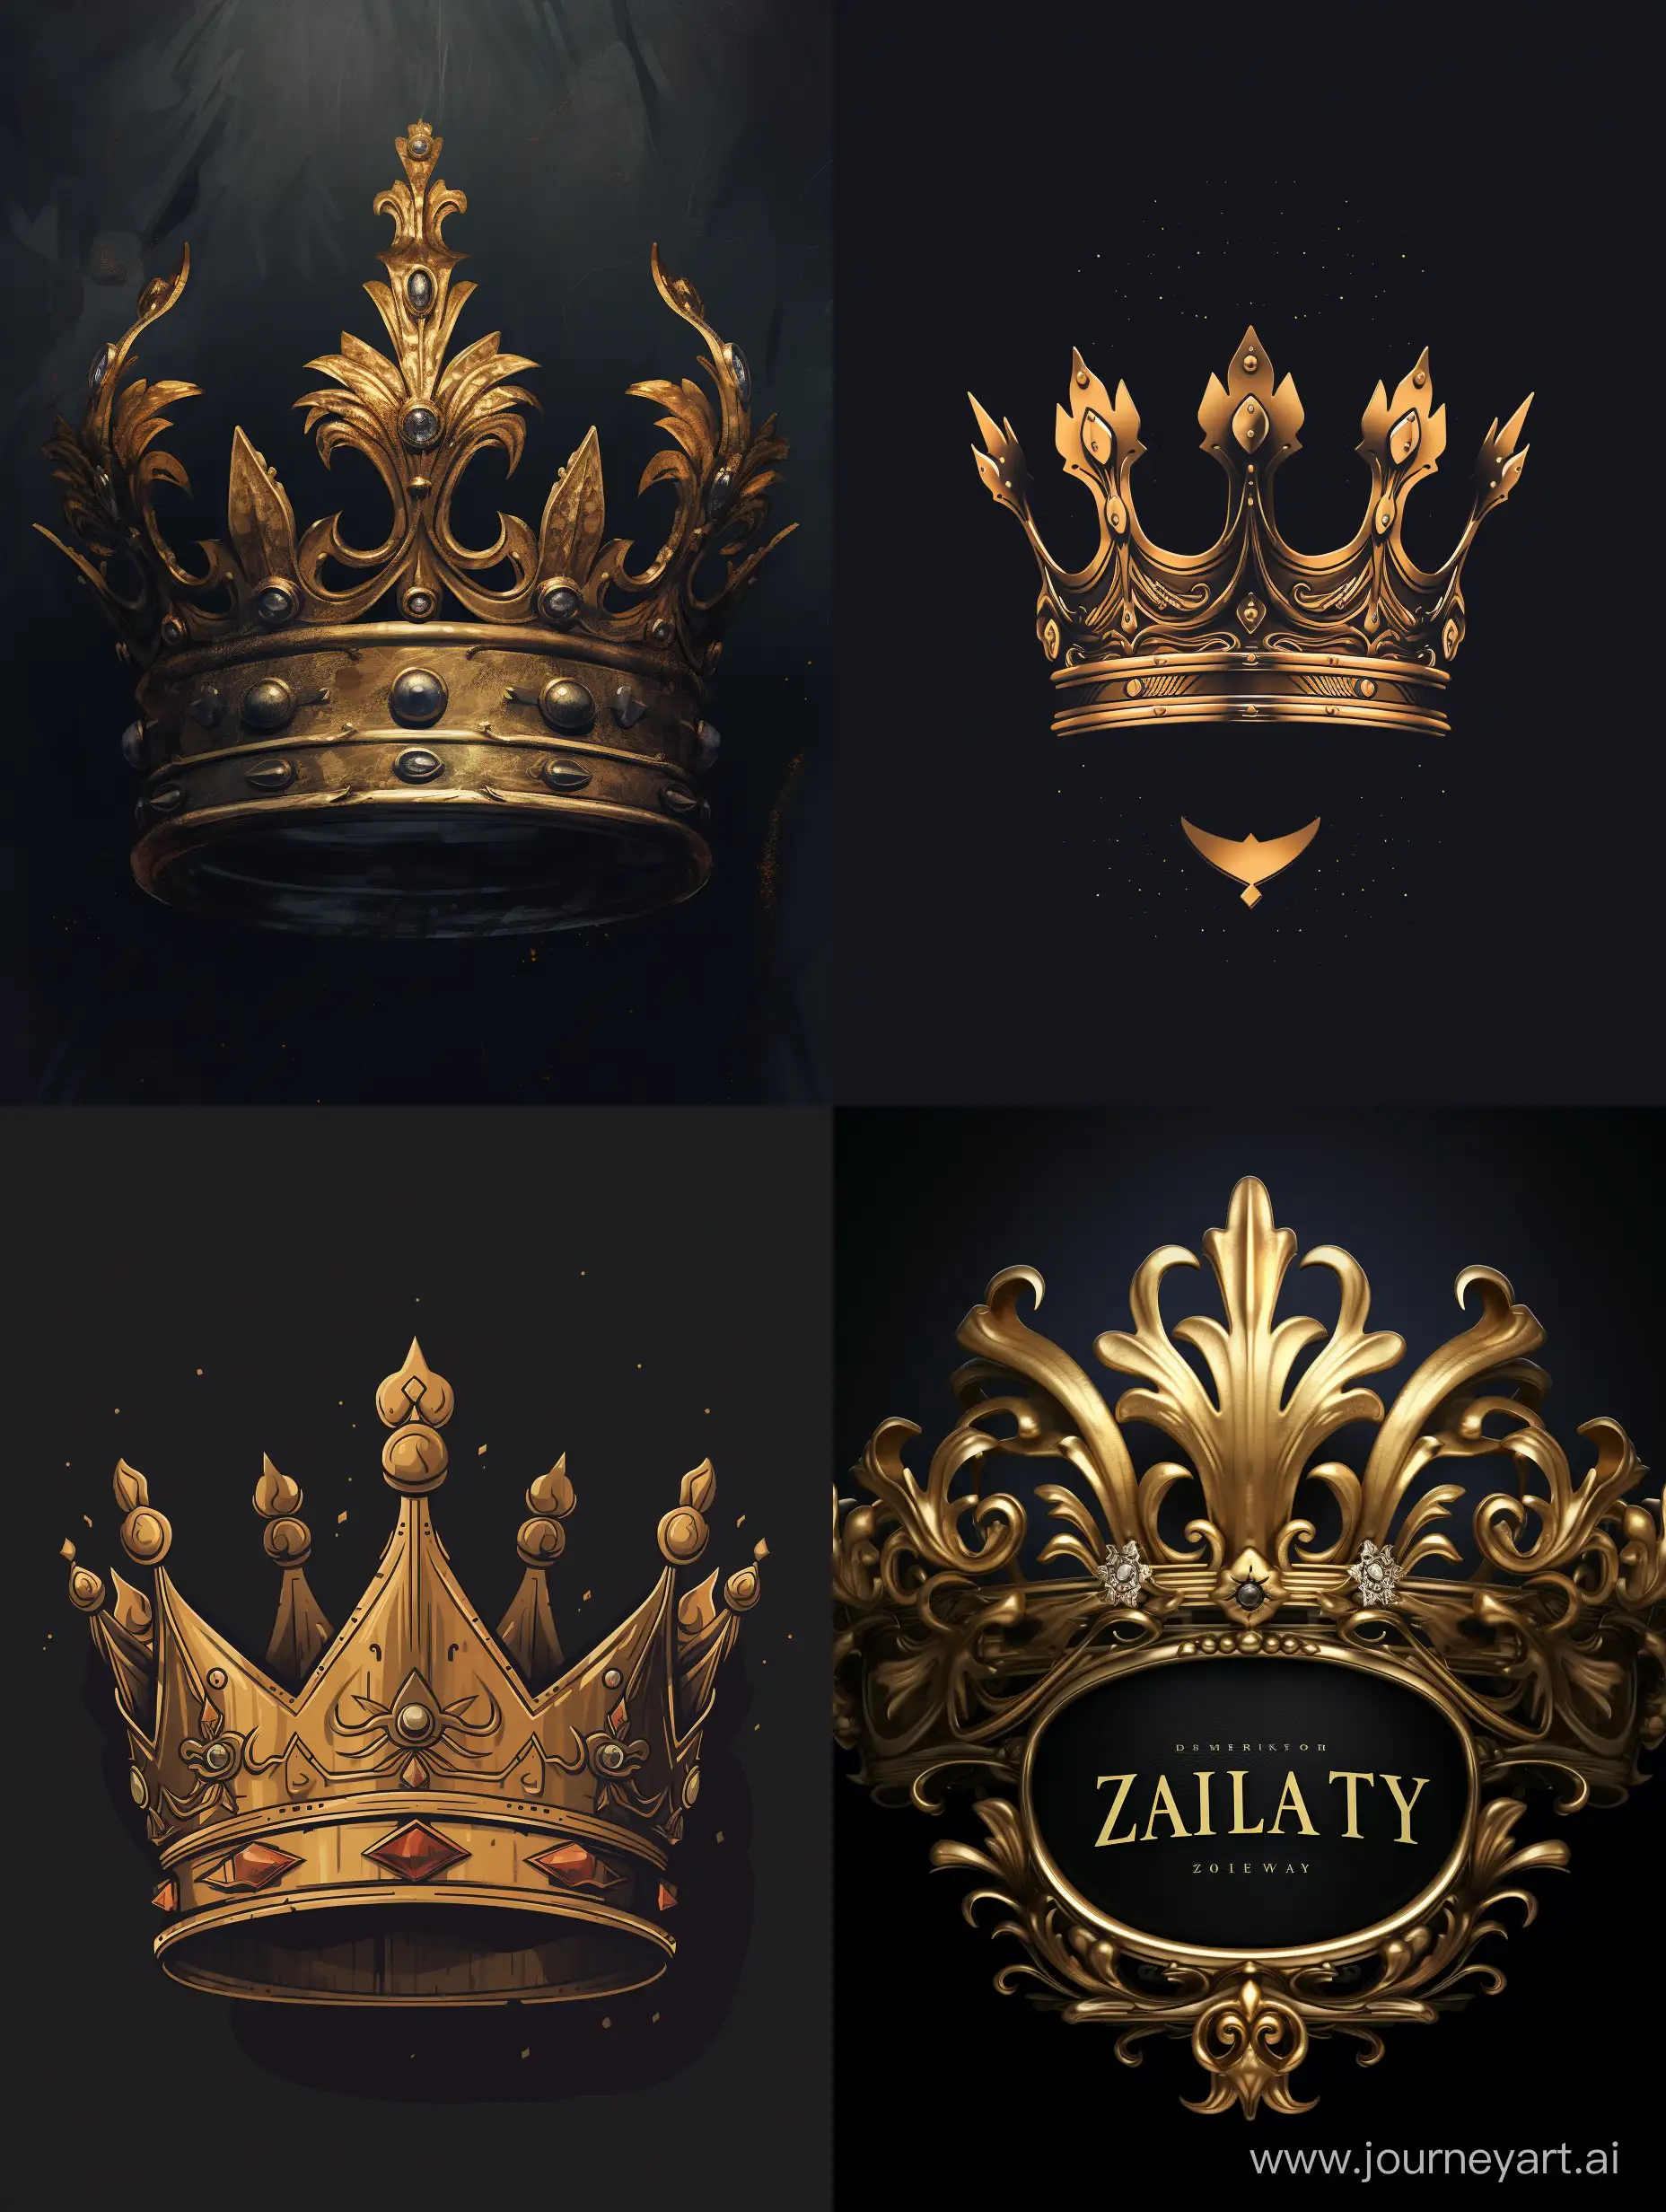 ZATLY-Logo-with-Crown-in-Artistic-34-Aspect-Ratio